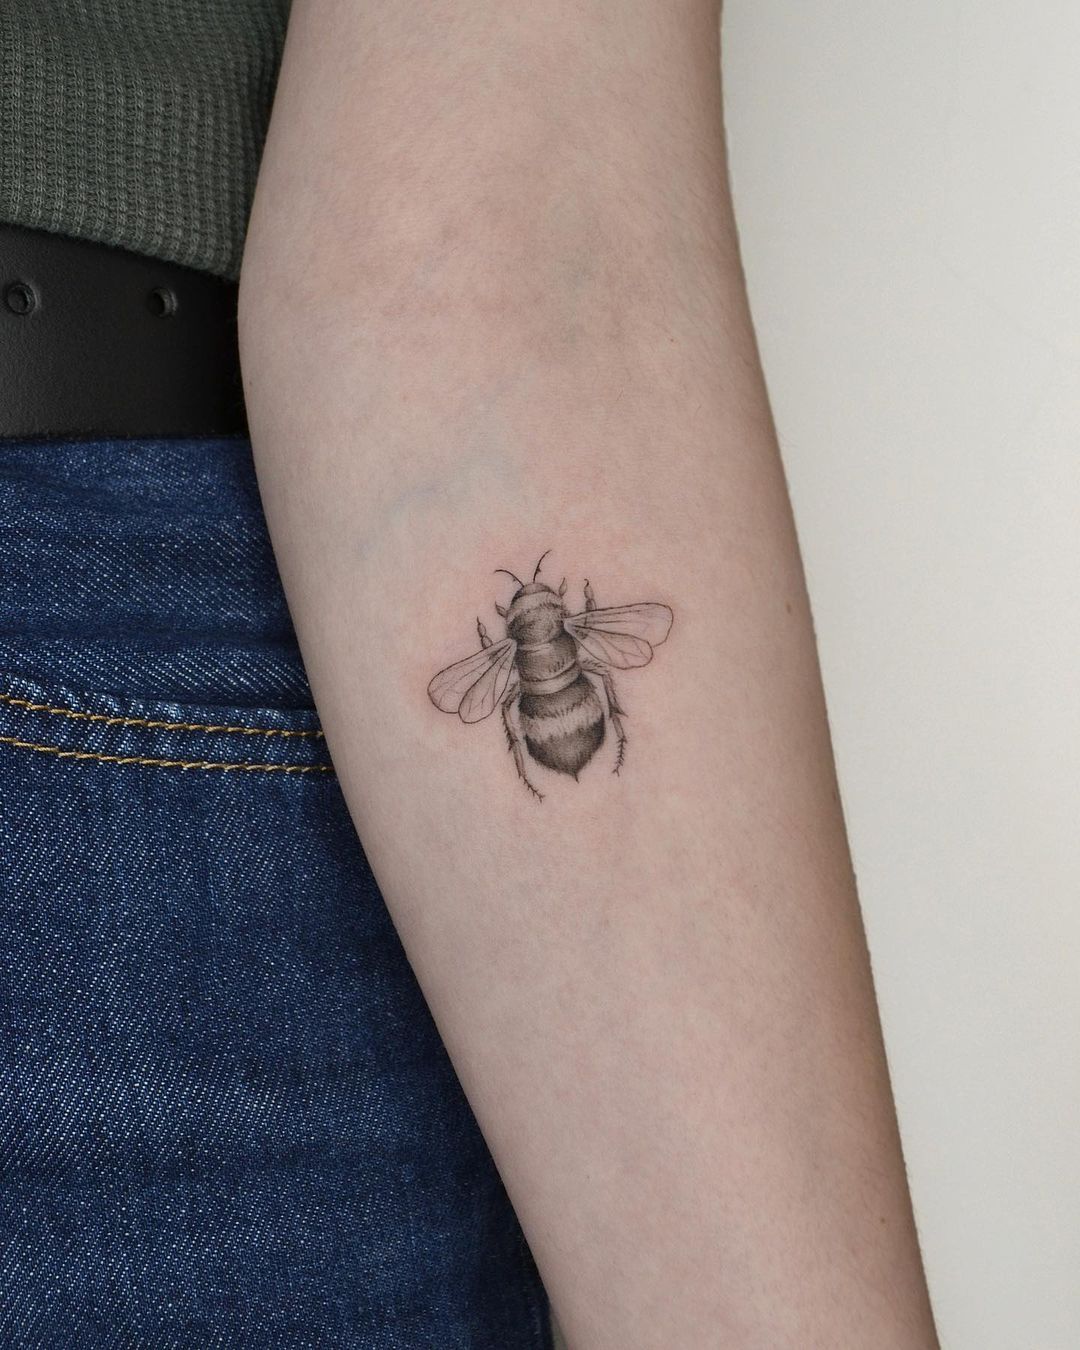 Buy Small Bee Temporary Tattoo Online in India - Etsy